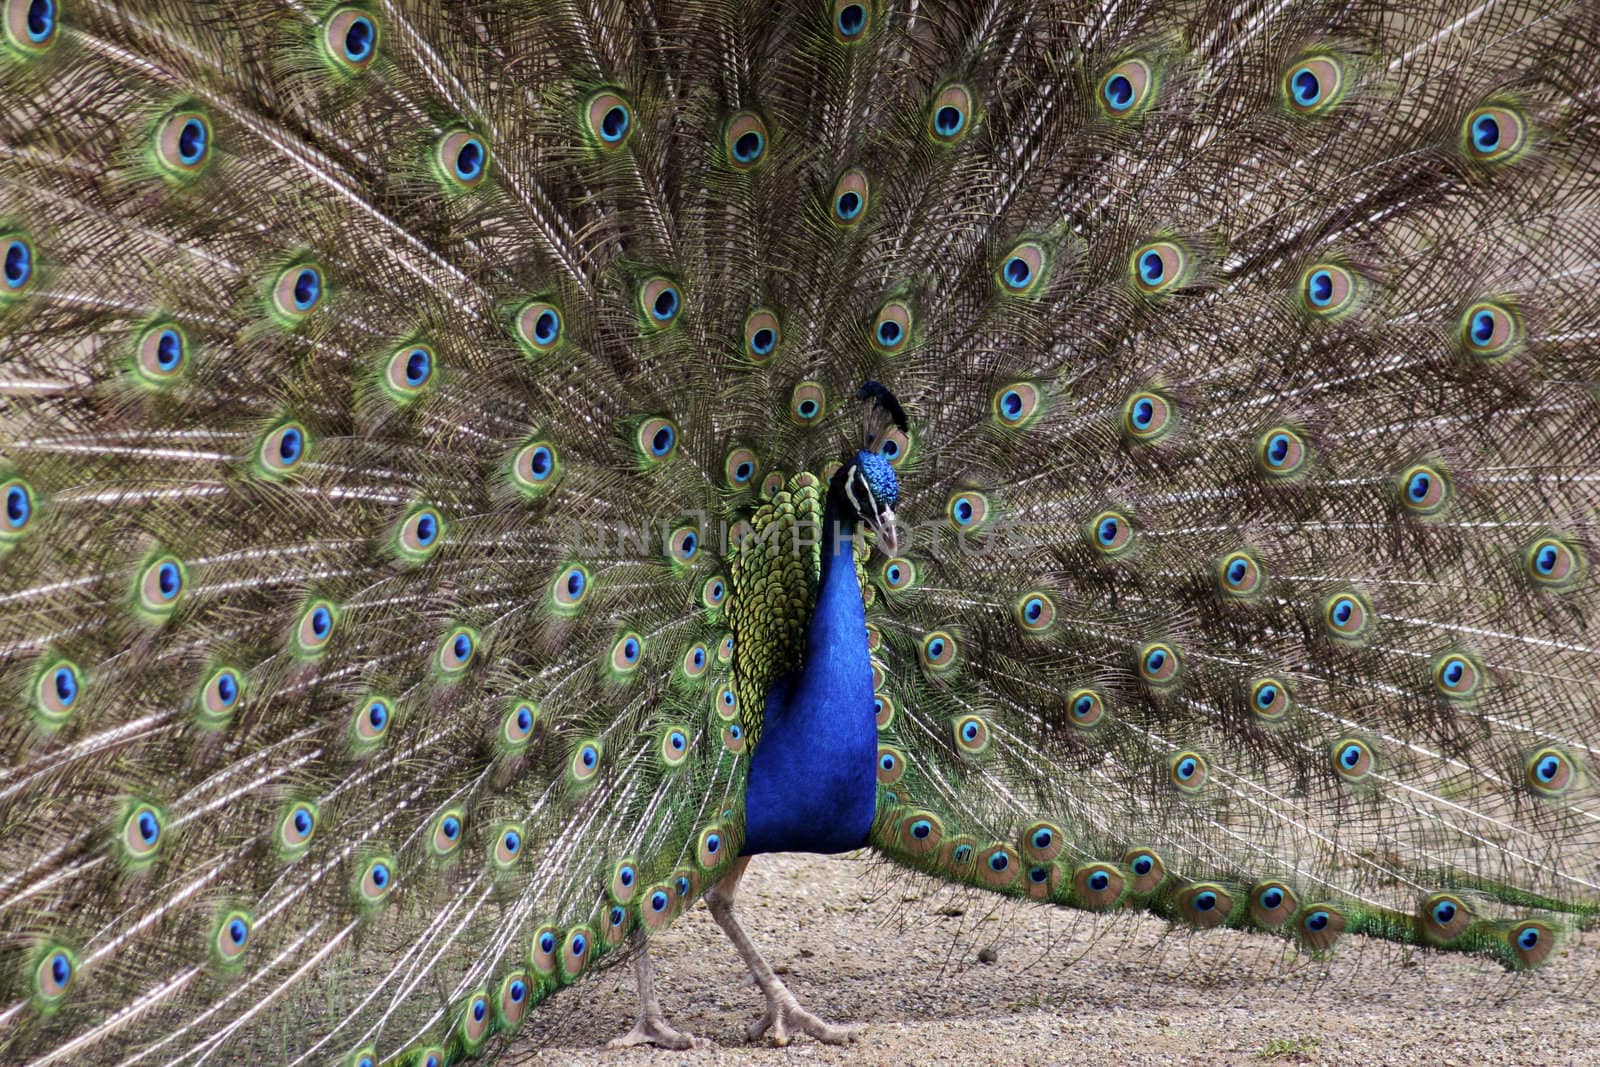 A male peacock displaying his amazing plumage